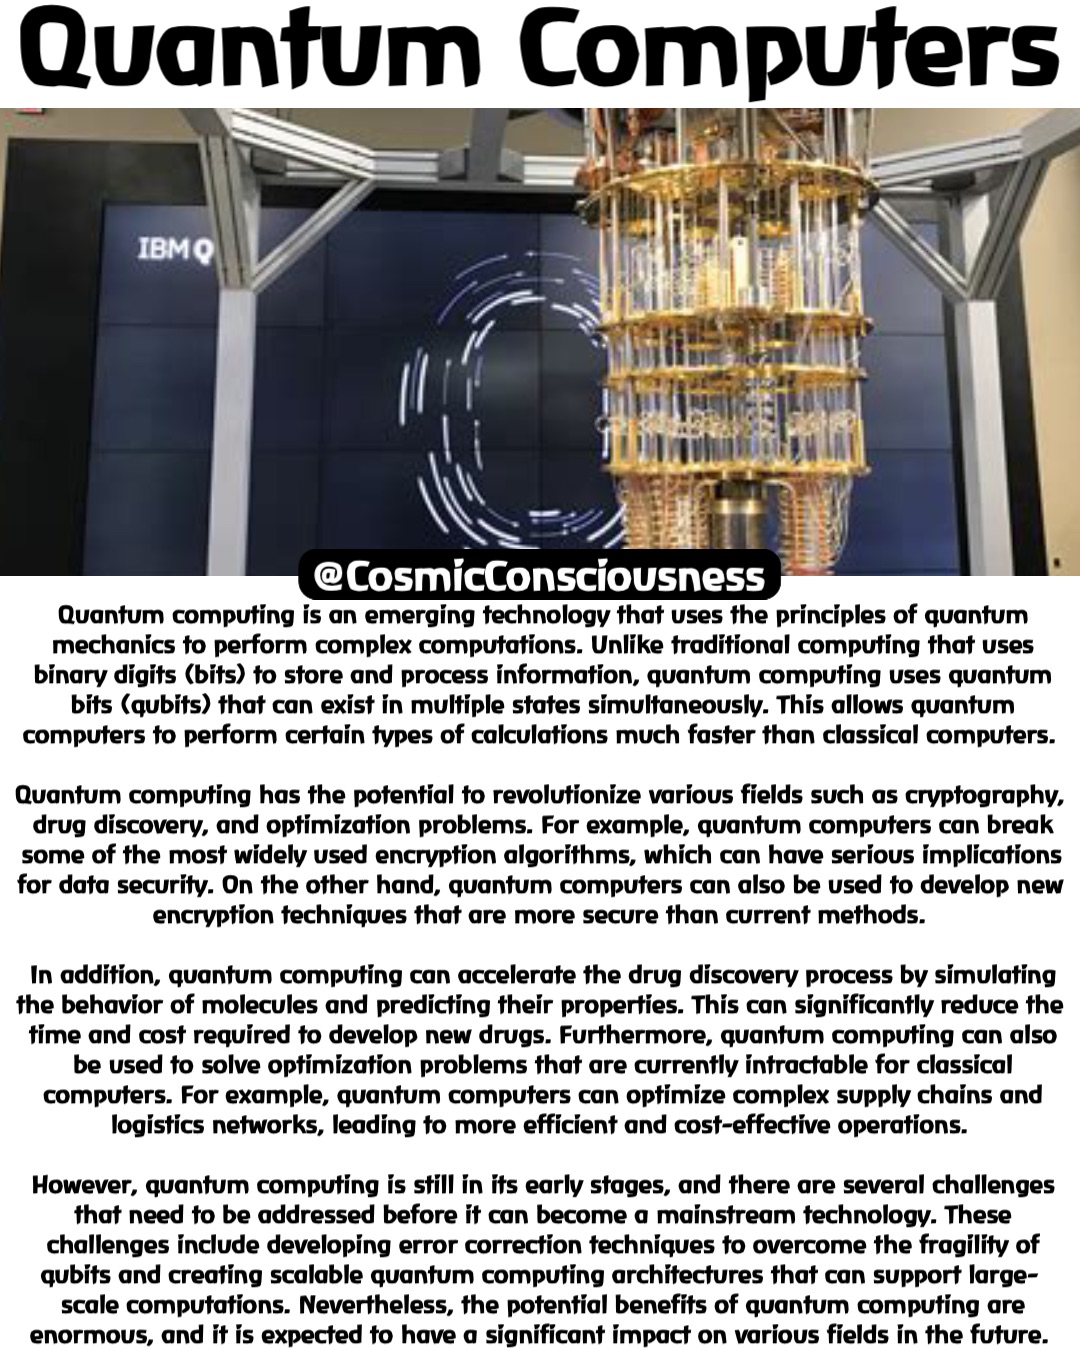 Quantum Computers Quantum computing is an emerging technology that uses the principles of quantum mechanics to perform complex computations. Unlike traditional computing that uses binary digits (bits) to store and process information, quantum computing uses quantum bits (qubits) that can exist in multiple states simultaneously. This allows quantum computers to perform certain types of calculations much faster than classical computers.

Quantum computing has the potential to revolutionize various fields such as cryptography, drug discovery, and optimization problems. For example, quantum computers can break some of the most widely used encryption algorithms, which can have serious implications for data security. On the other hand, quantum computers can also be used to develop new encryption techniques that are more secure than current methods.

In addition, quantum computing can accelerate the drug discovery process by simulating the behavior of molecules and predicting their properties. This can significantly reduce the time and cost required to develop new drugs. Furthermore, quantum computing can also be used to solve optimization problems that are currently intractable for classical computers. For example, quantum computers can optimize complex supply chains and logistics networks, leading to more efficient and cost-effective operations.

However, quantum computing is still in its early stages, and there are several challenges that need to be addressed before it can become a mainstream technology. These challenges include developing error correction techniques to overcome the fragility of qubits and creating scalable quantum computing architectures that can support large-scale computations. Nevertheless, the potential benefits of quantum computing are enormous, and it is expected to have a significant impact on various fields in the future. @CosmicConsciousness